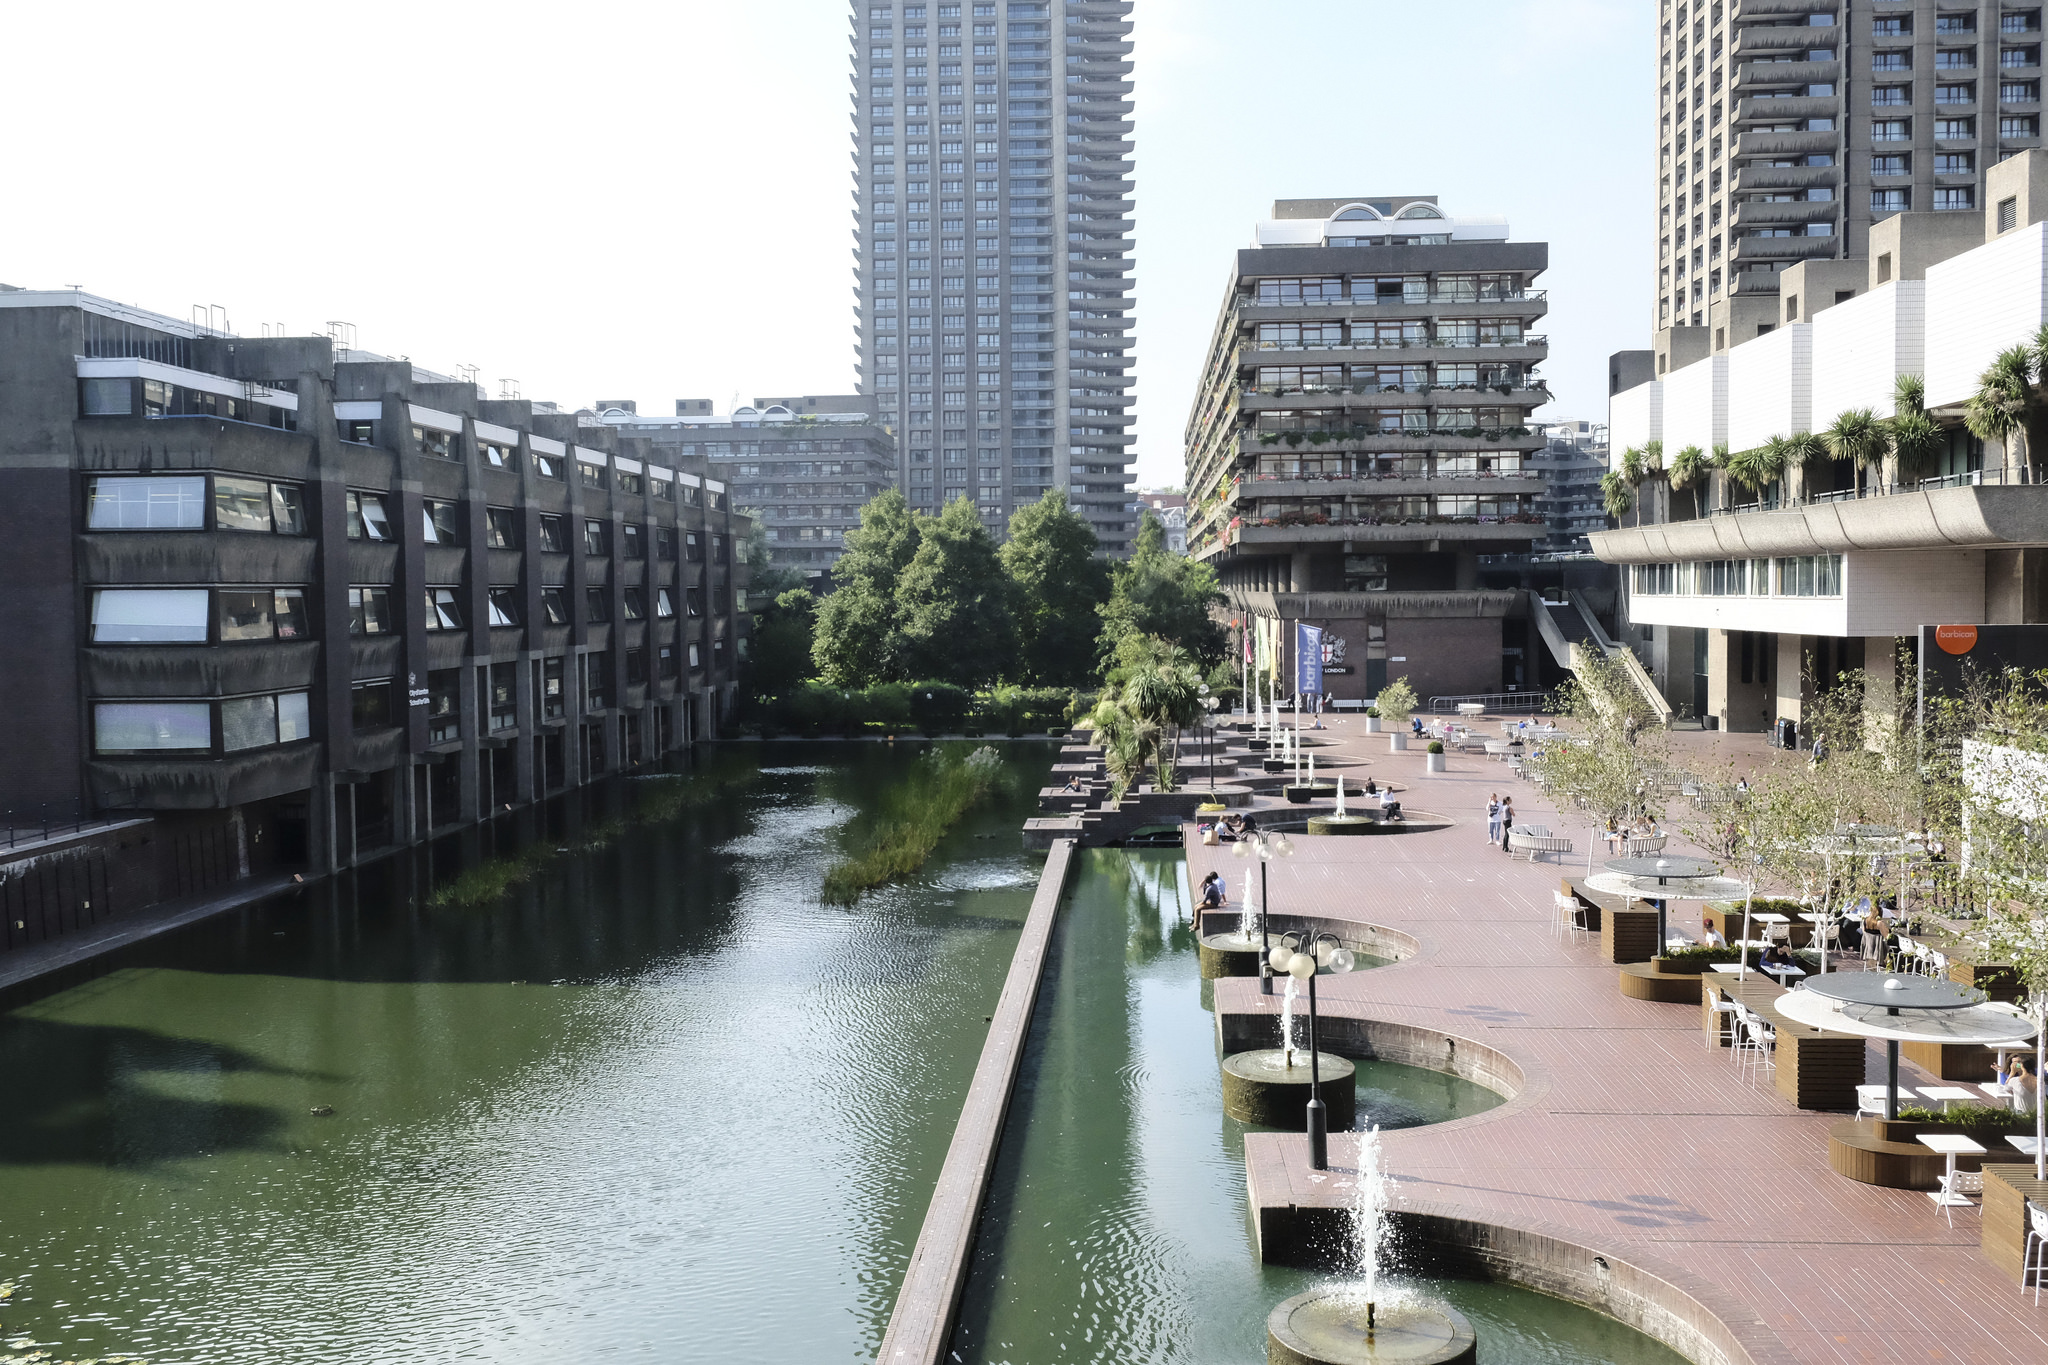 photograph of the Barbican showing a water feature, public seating and shopping, some housing, and the towers in the background